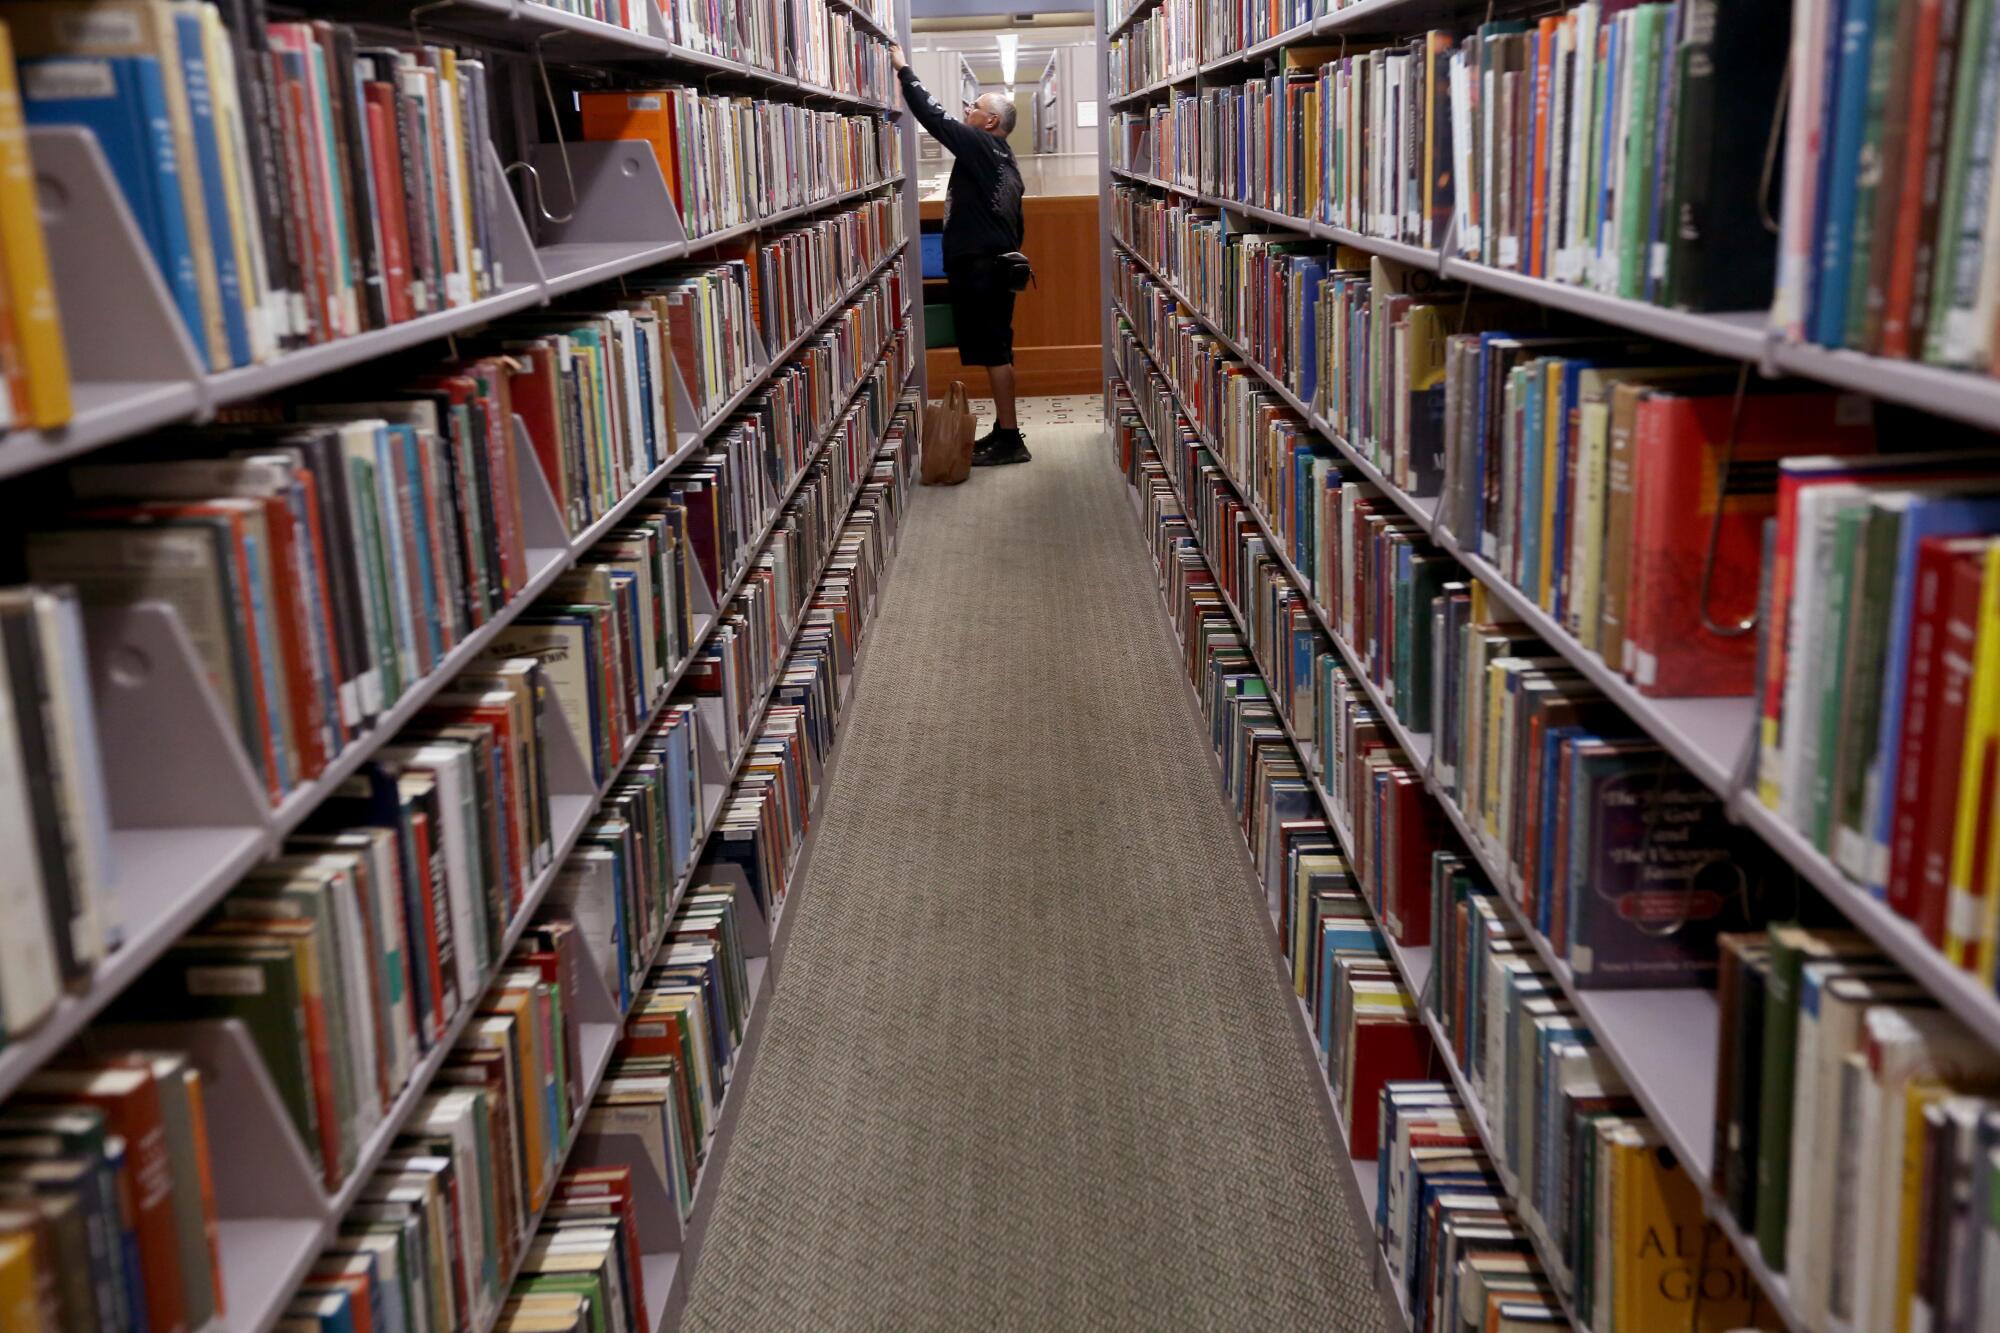 Richard DePriest looks for a book in the religion section at the Richard Riordan Central Library in downtown Los Angeles.